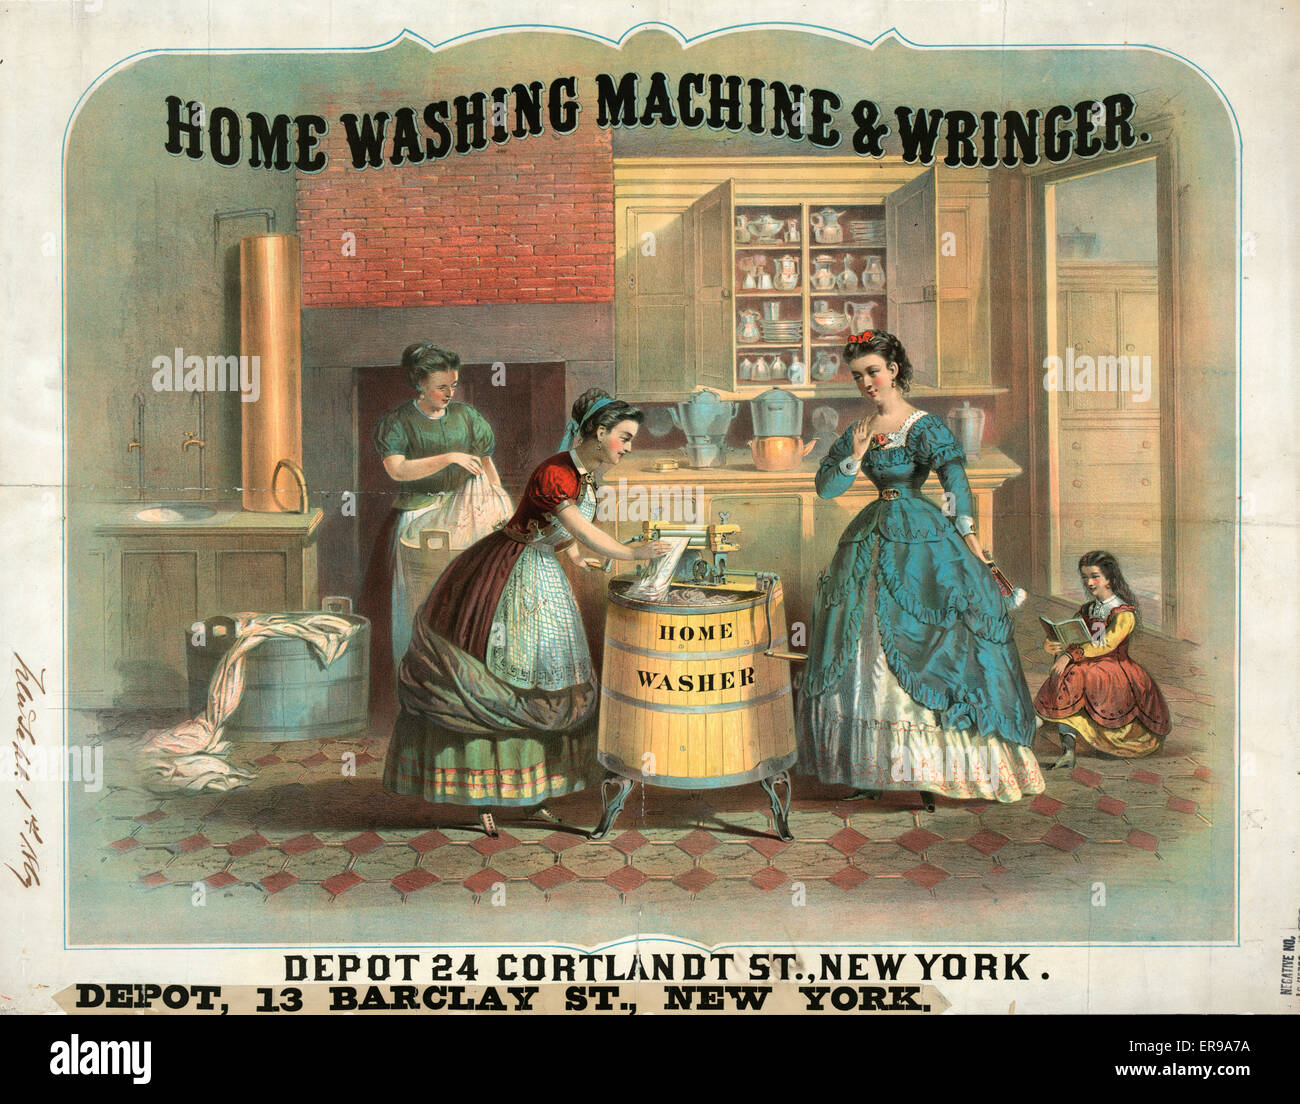 Home washing machine &amp; wringer. Interior view of a kitchen showing woman using a washing machine as her employer watches. In background another woman washes clothes in a wash tub. Date 1869?. Home washing machine &amp; wringer. Interior view of a kitc Stock Photo